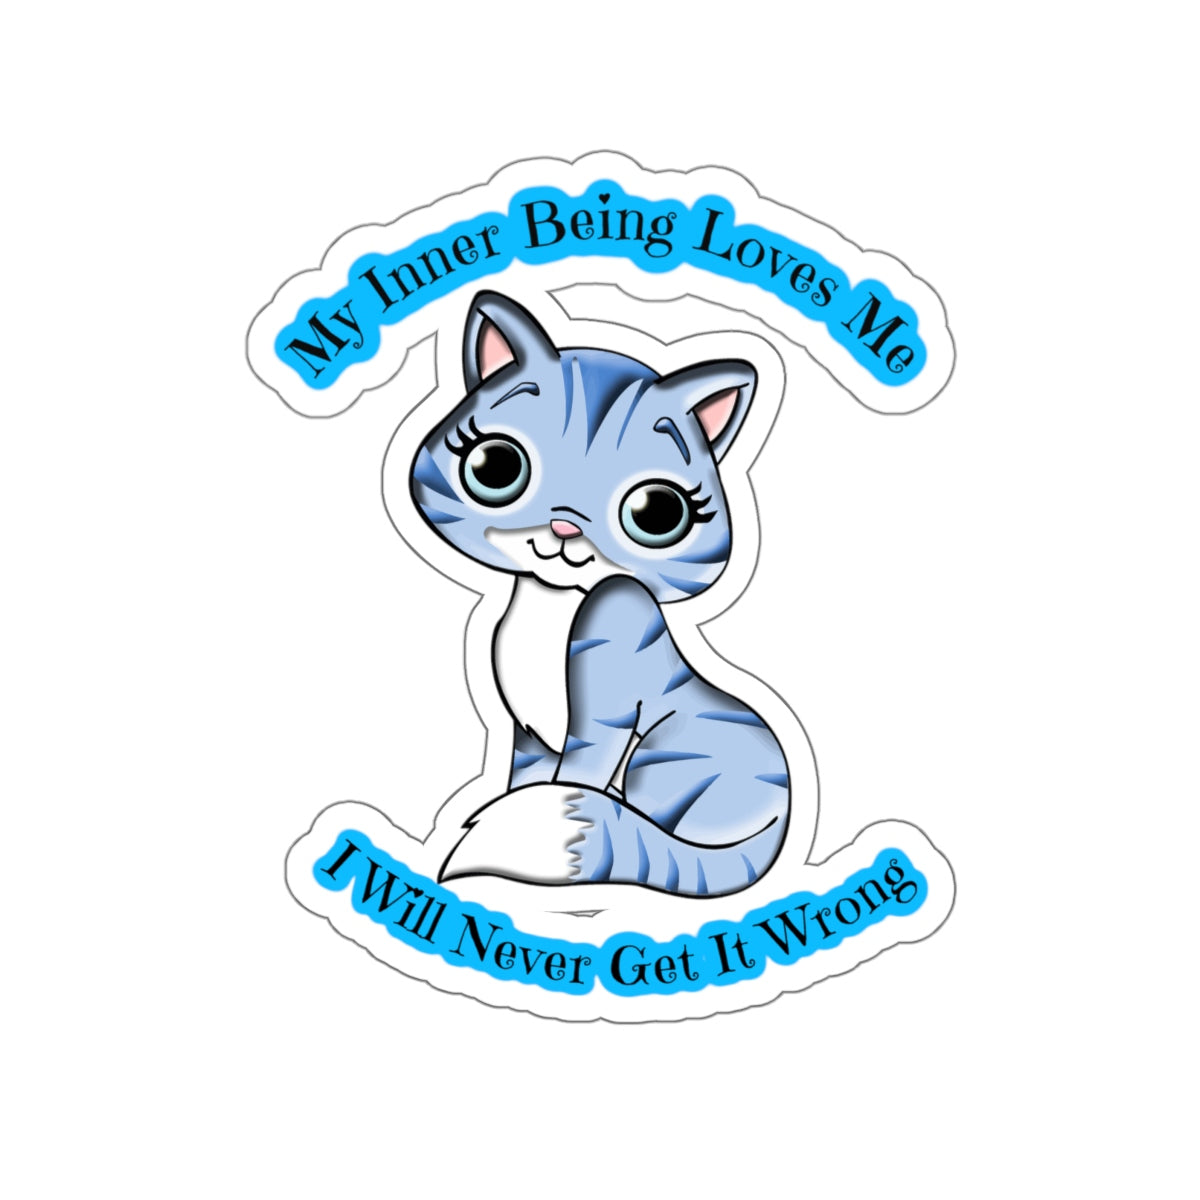 My Inner Being Loves Me - LOA Kiss-Cut Stickers